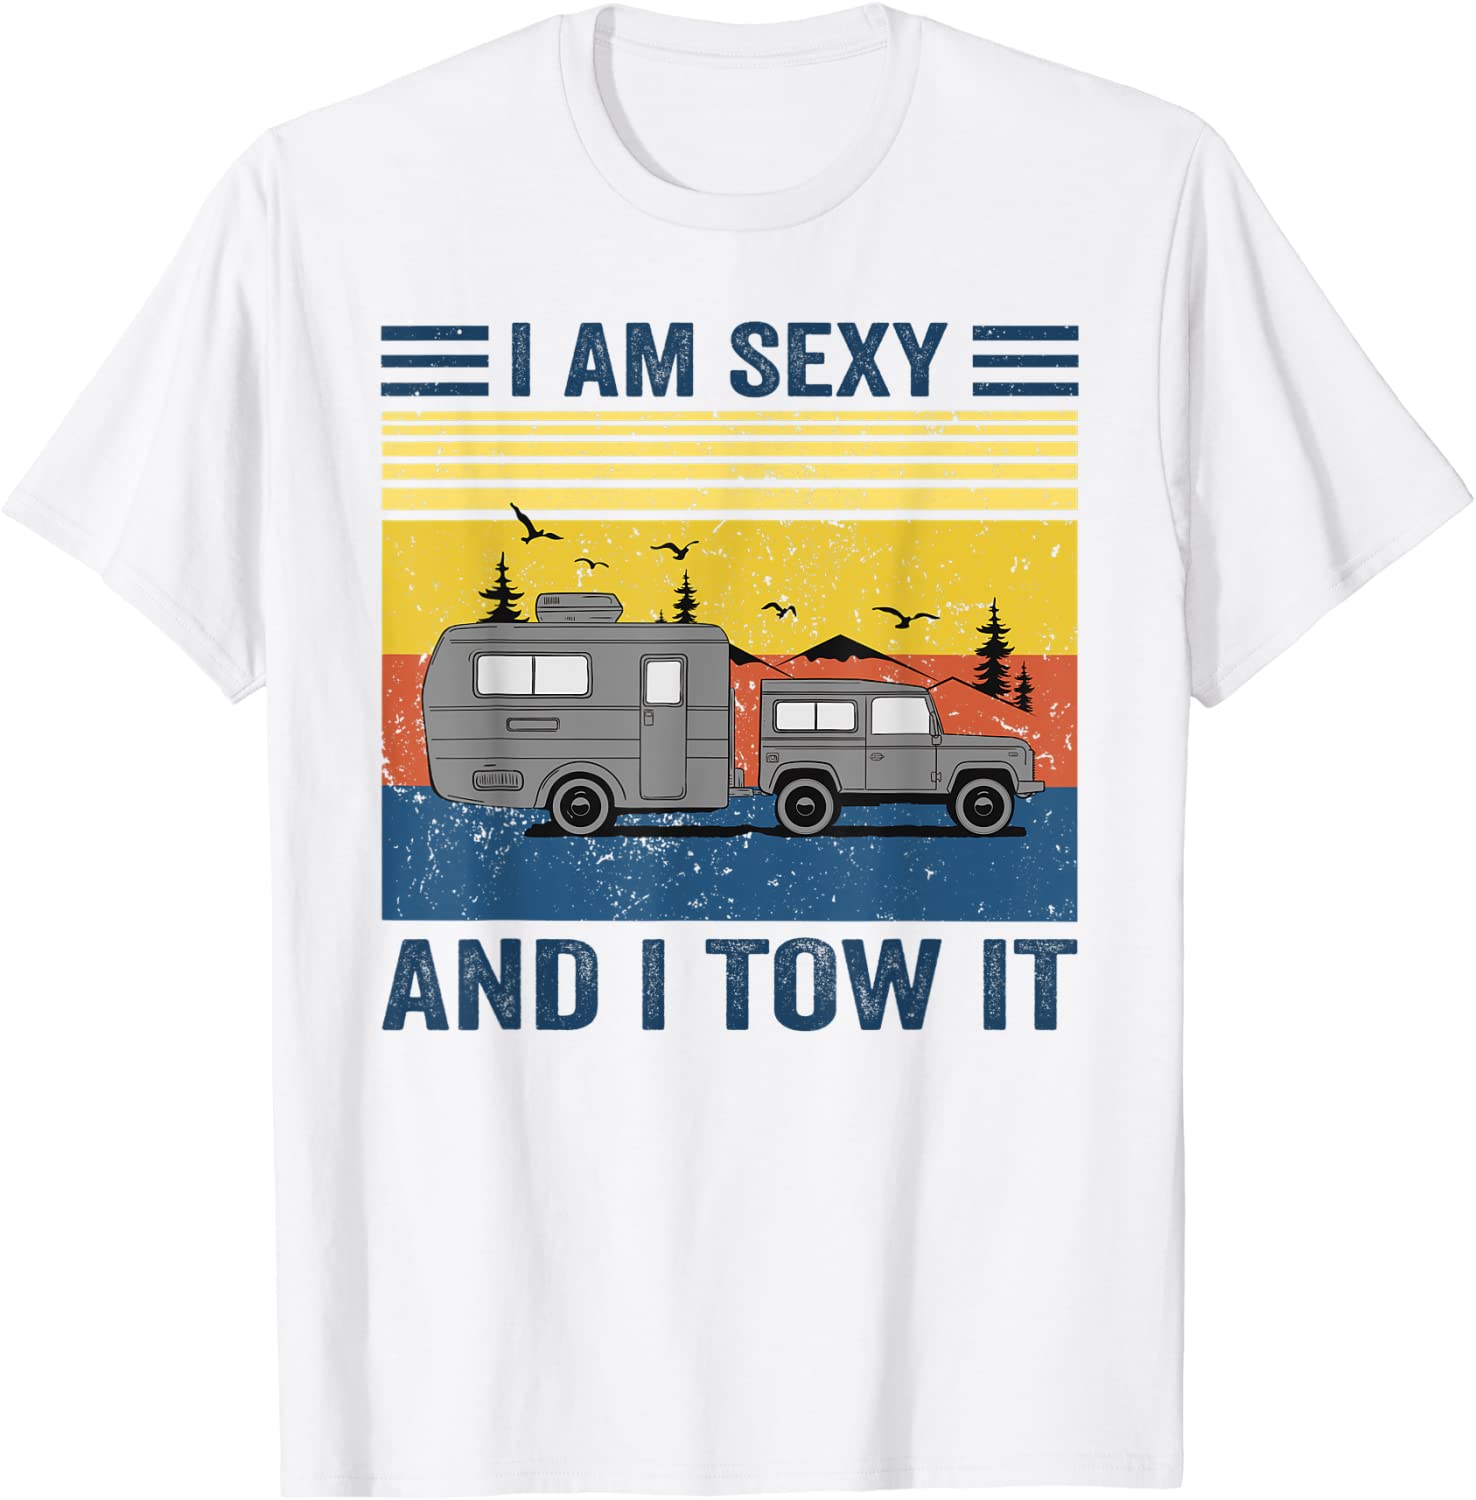 I'm Sexy And I Tow It Shirt Funny Caravan Camping RV Trailer T-Shirt